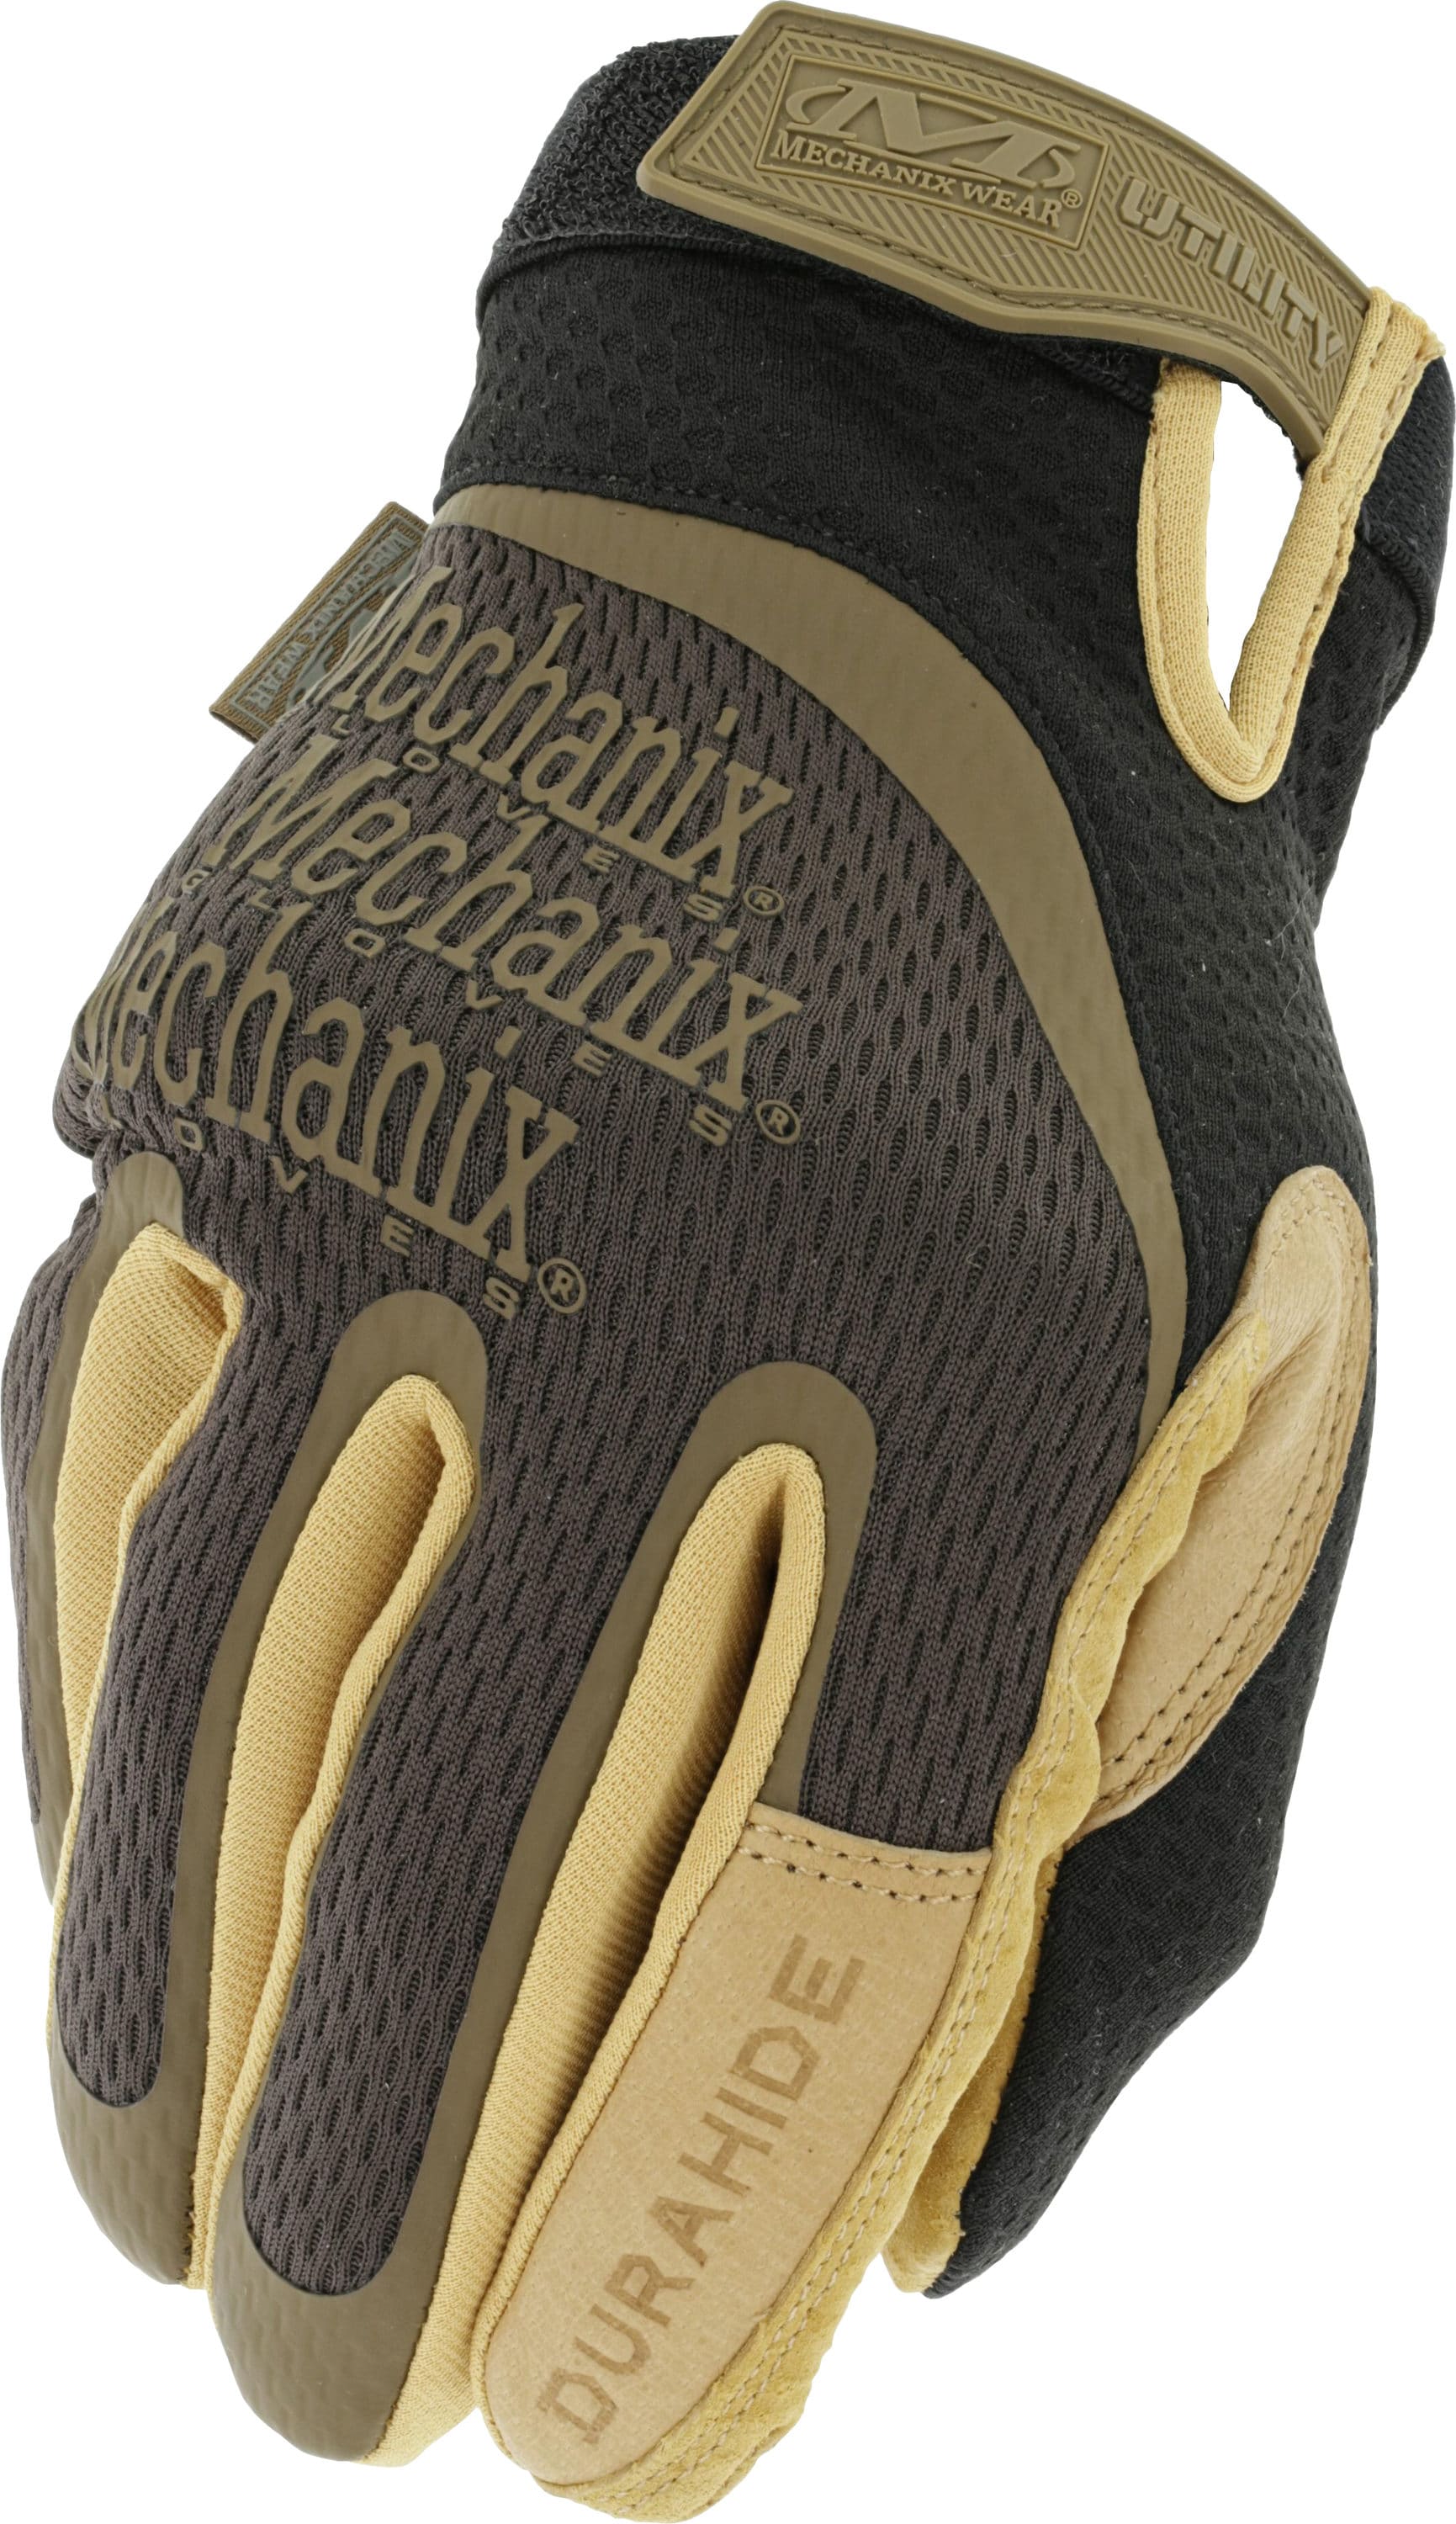 FIRM GRIP General Purpose Landscape Extra Large Glove (1-Pack